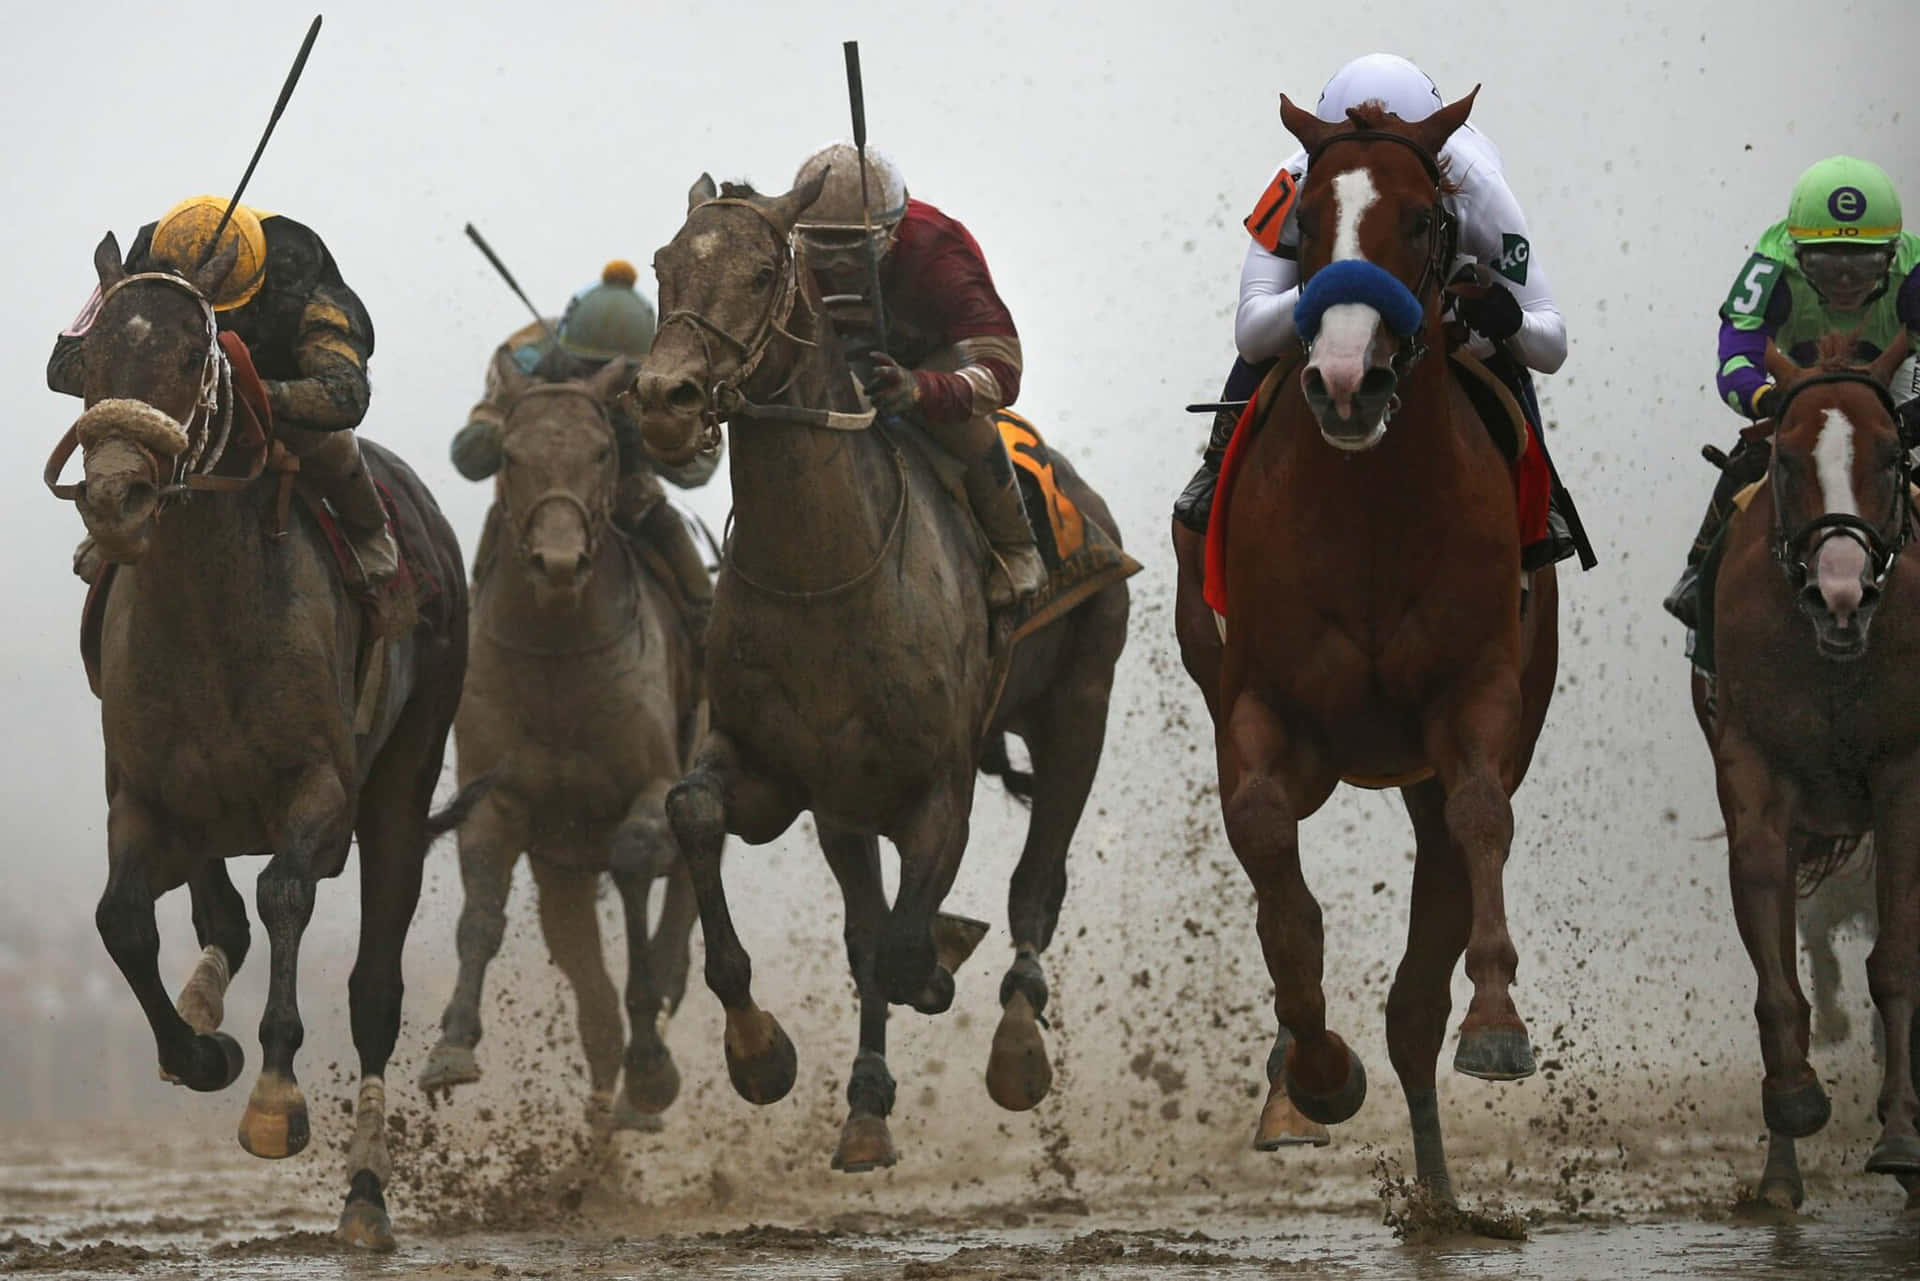 A Group Of Jockeys Are Racing In A Muddy Race